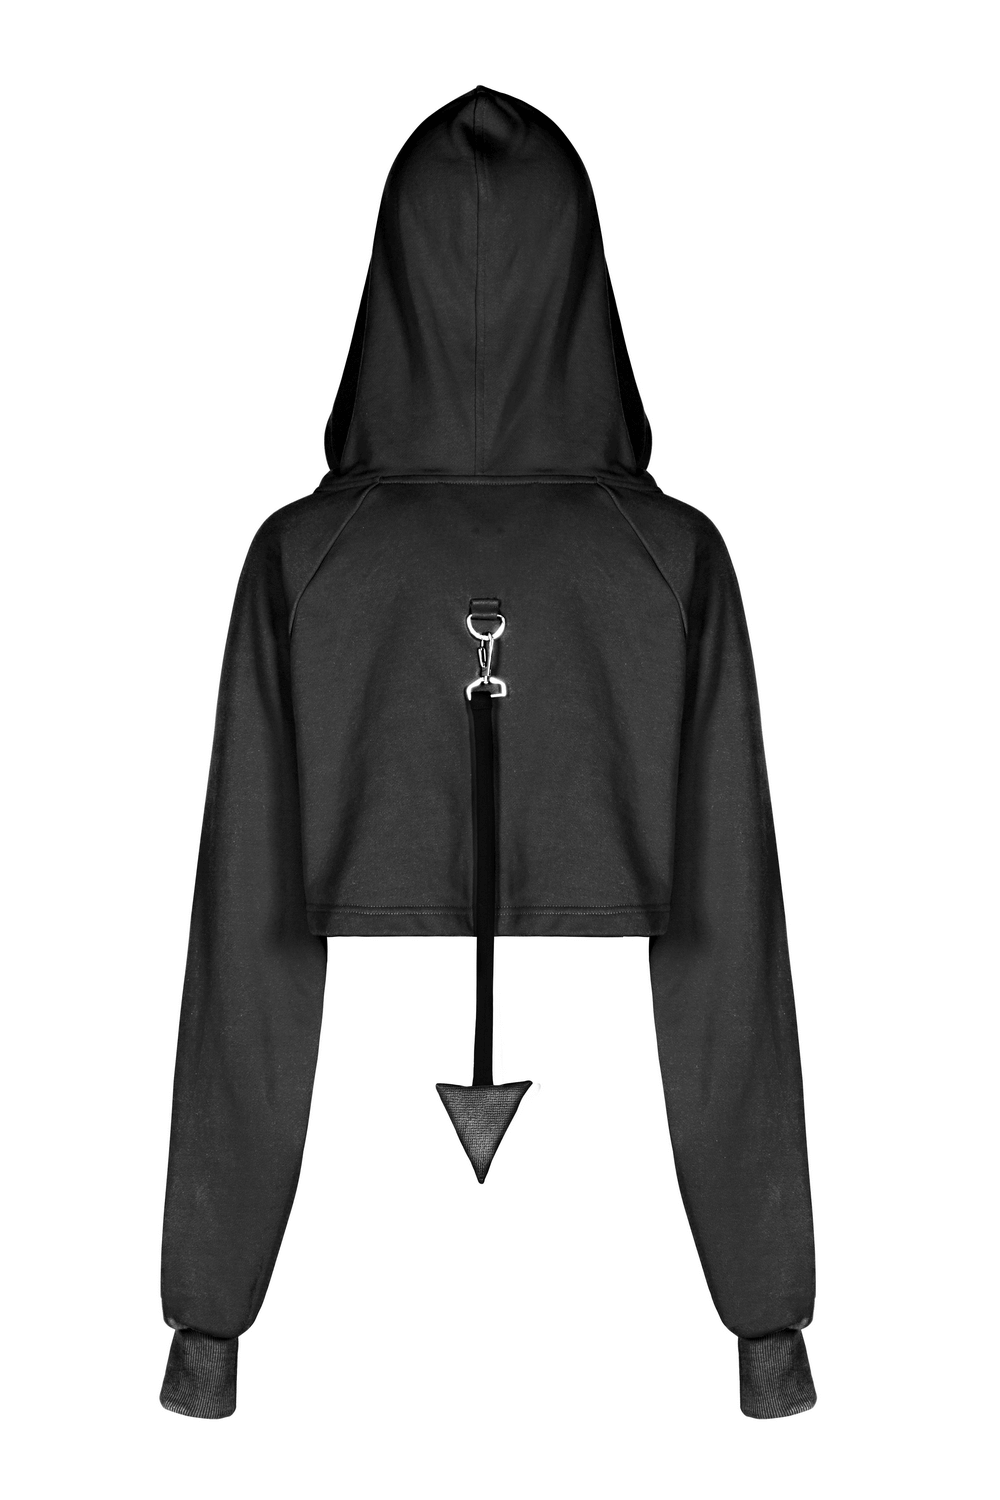 Edgy Black Crop Hoodie with Devil Horns and Tail